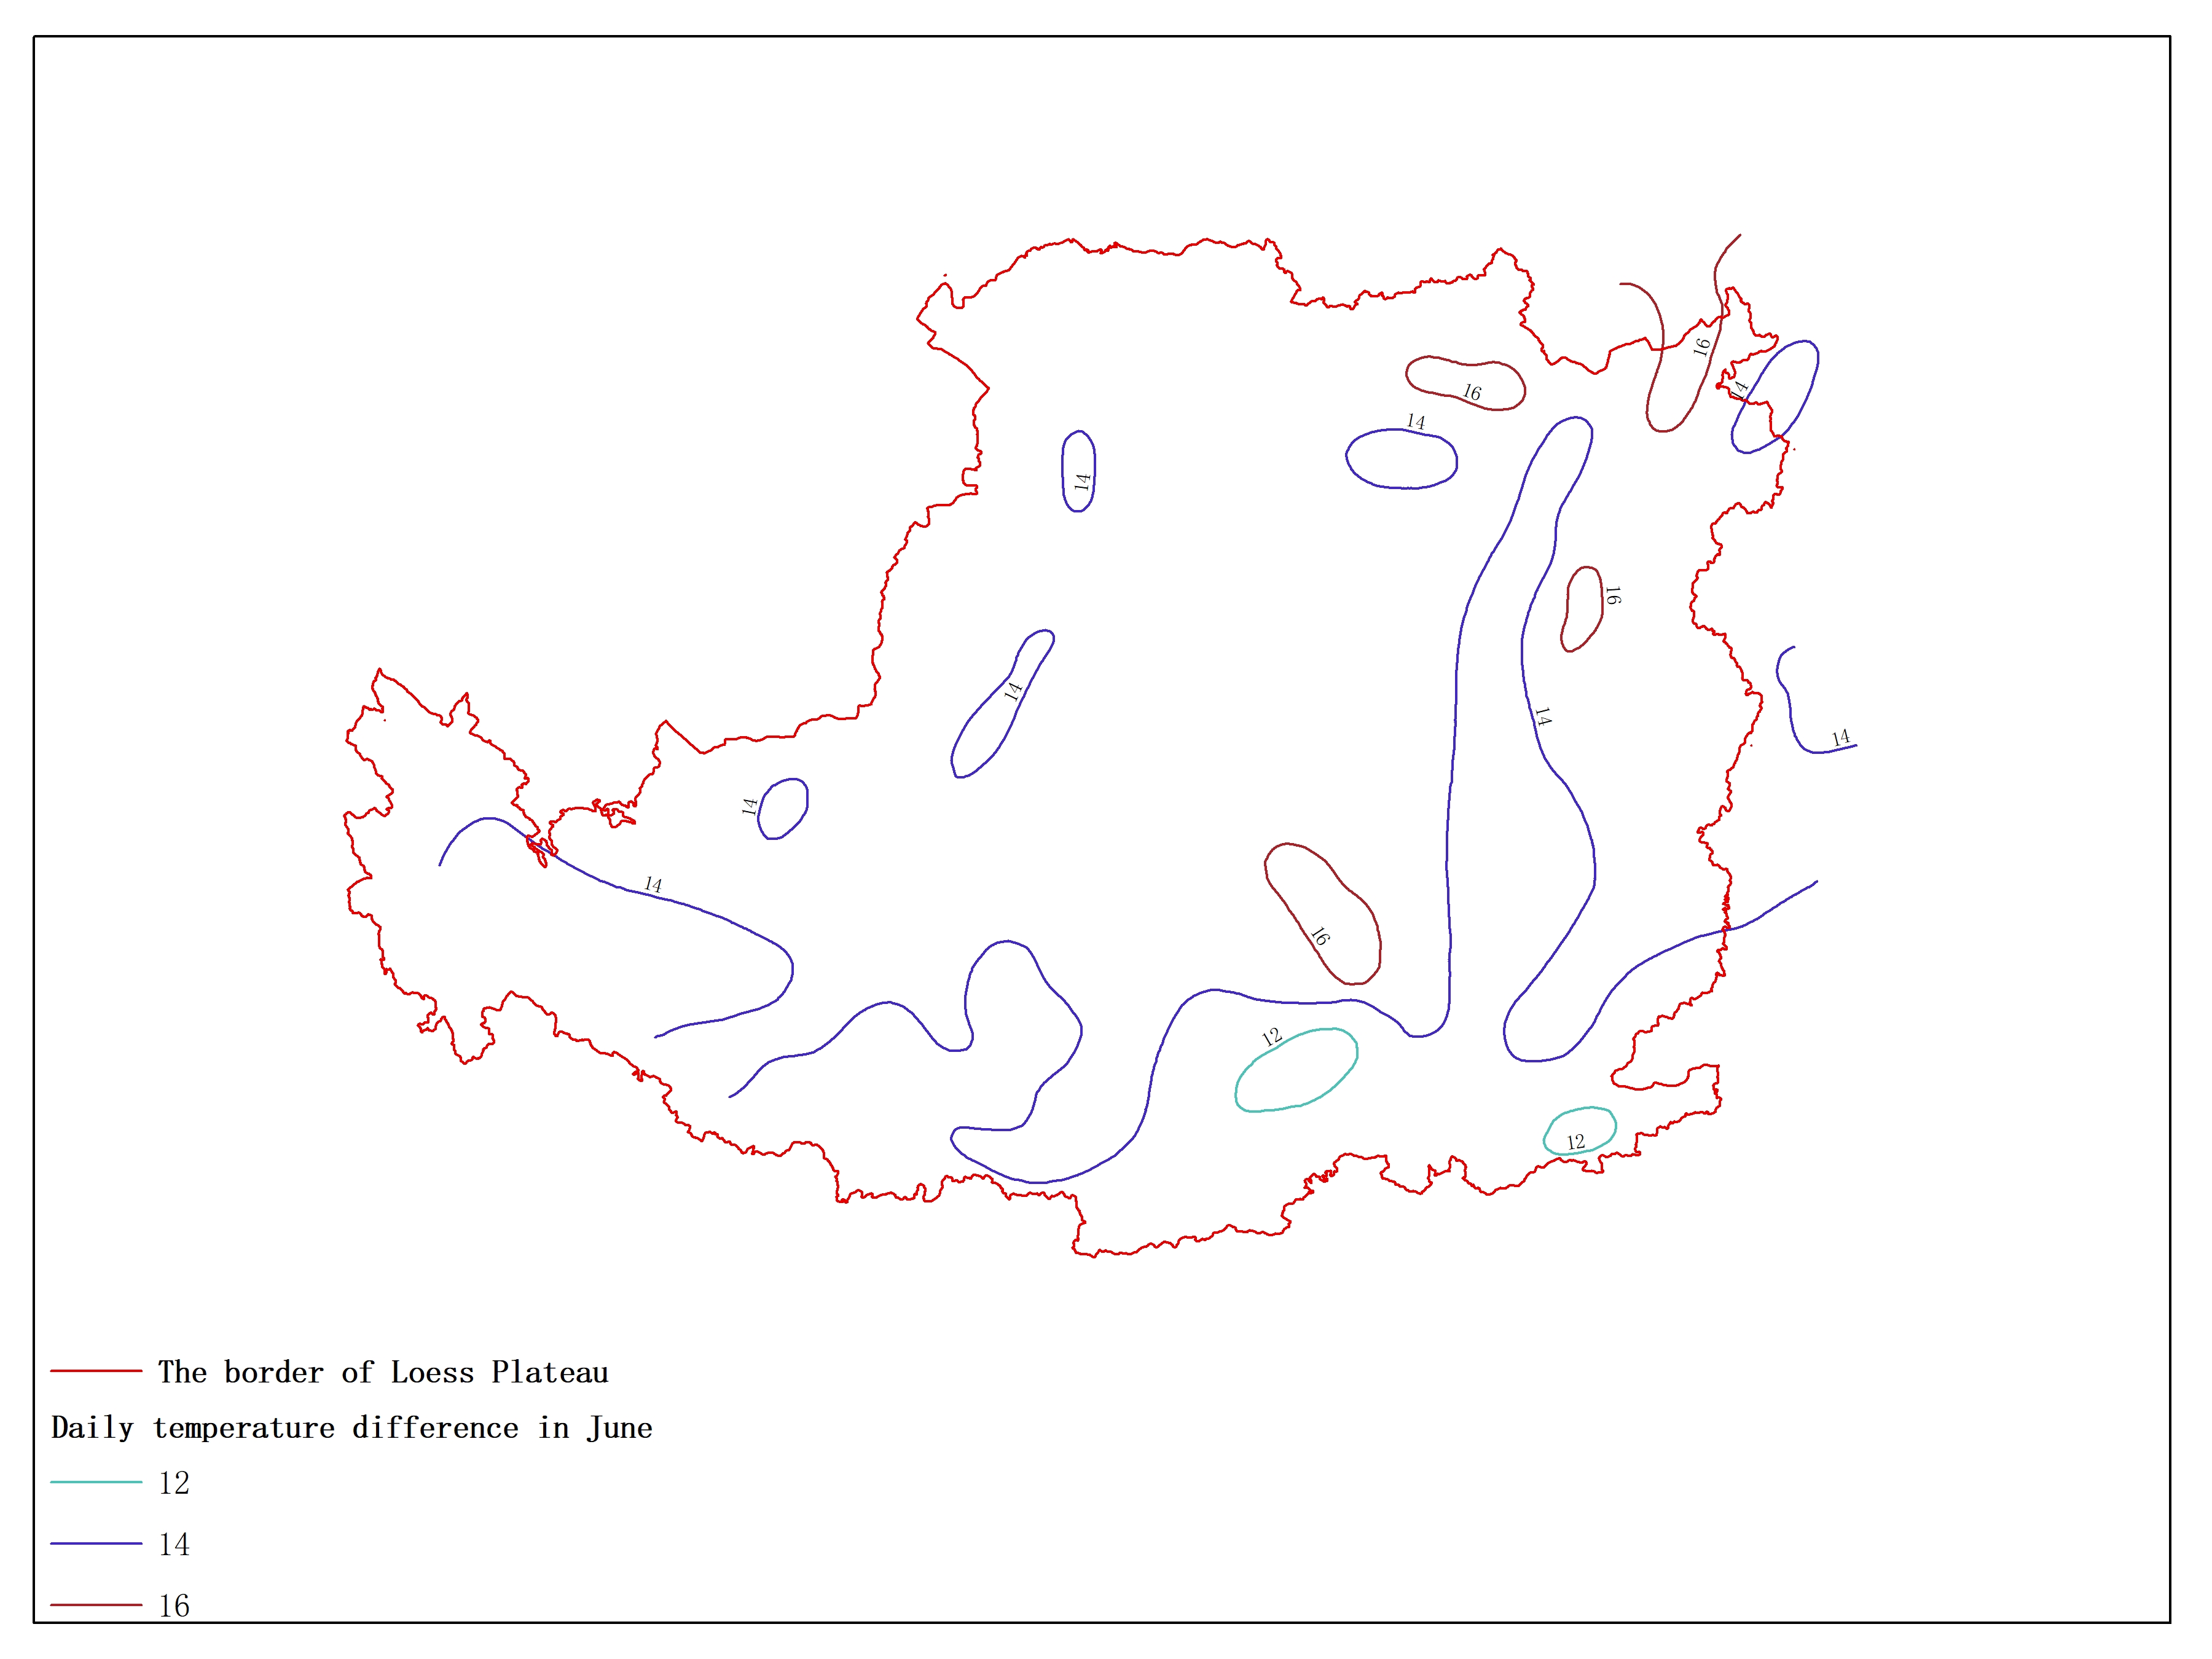 Agricultural climate resource atlas of Loess Plateau-Daily temperature difference in June